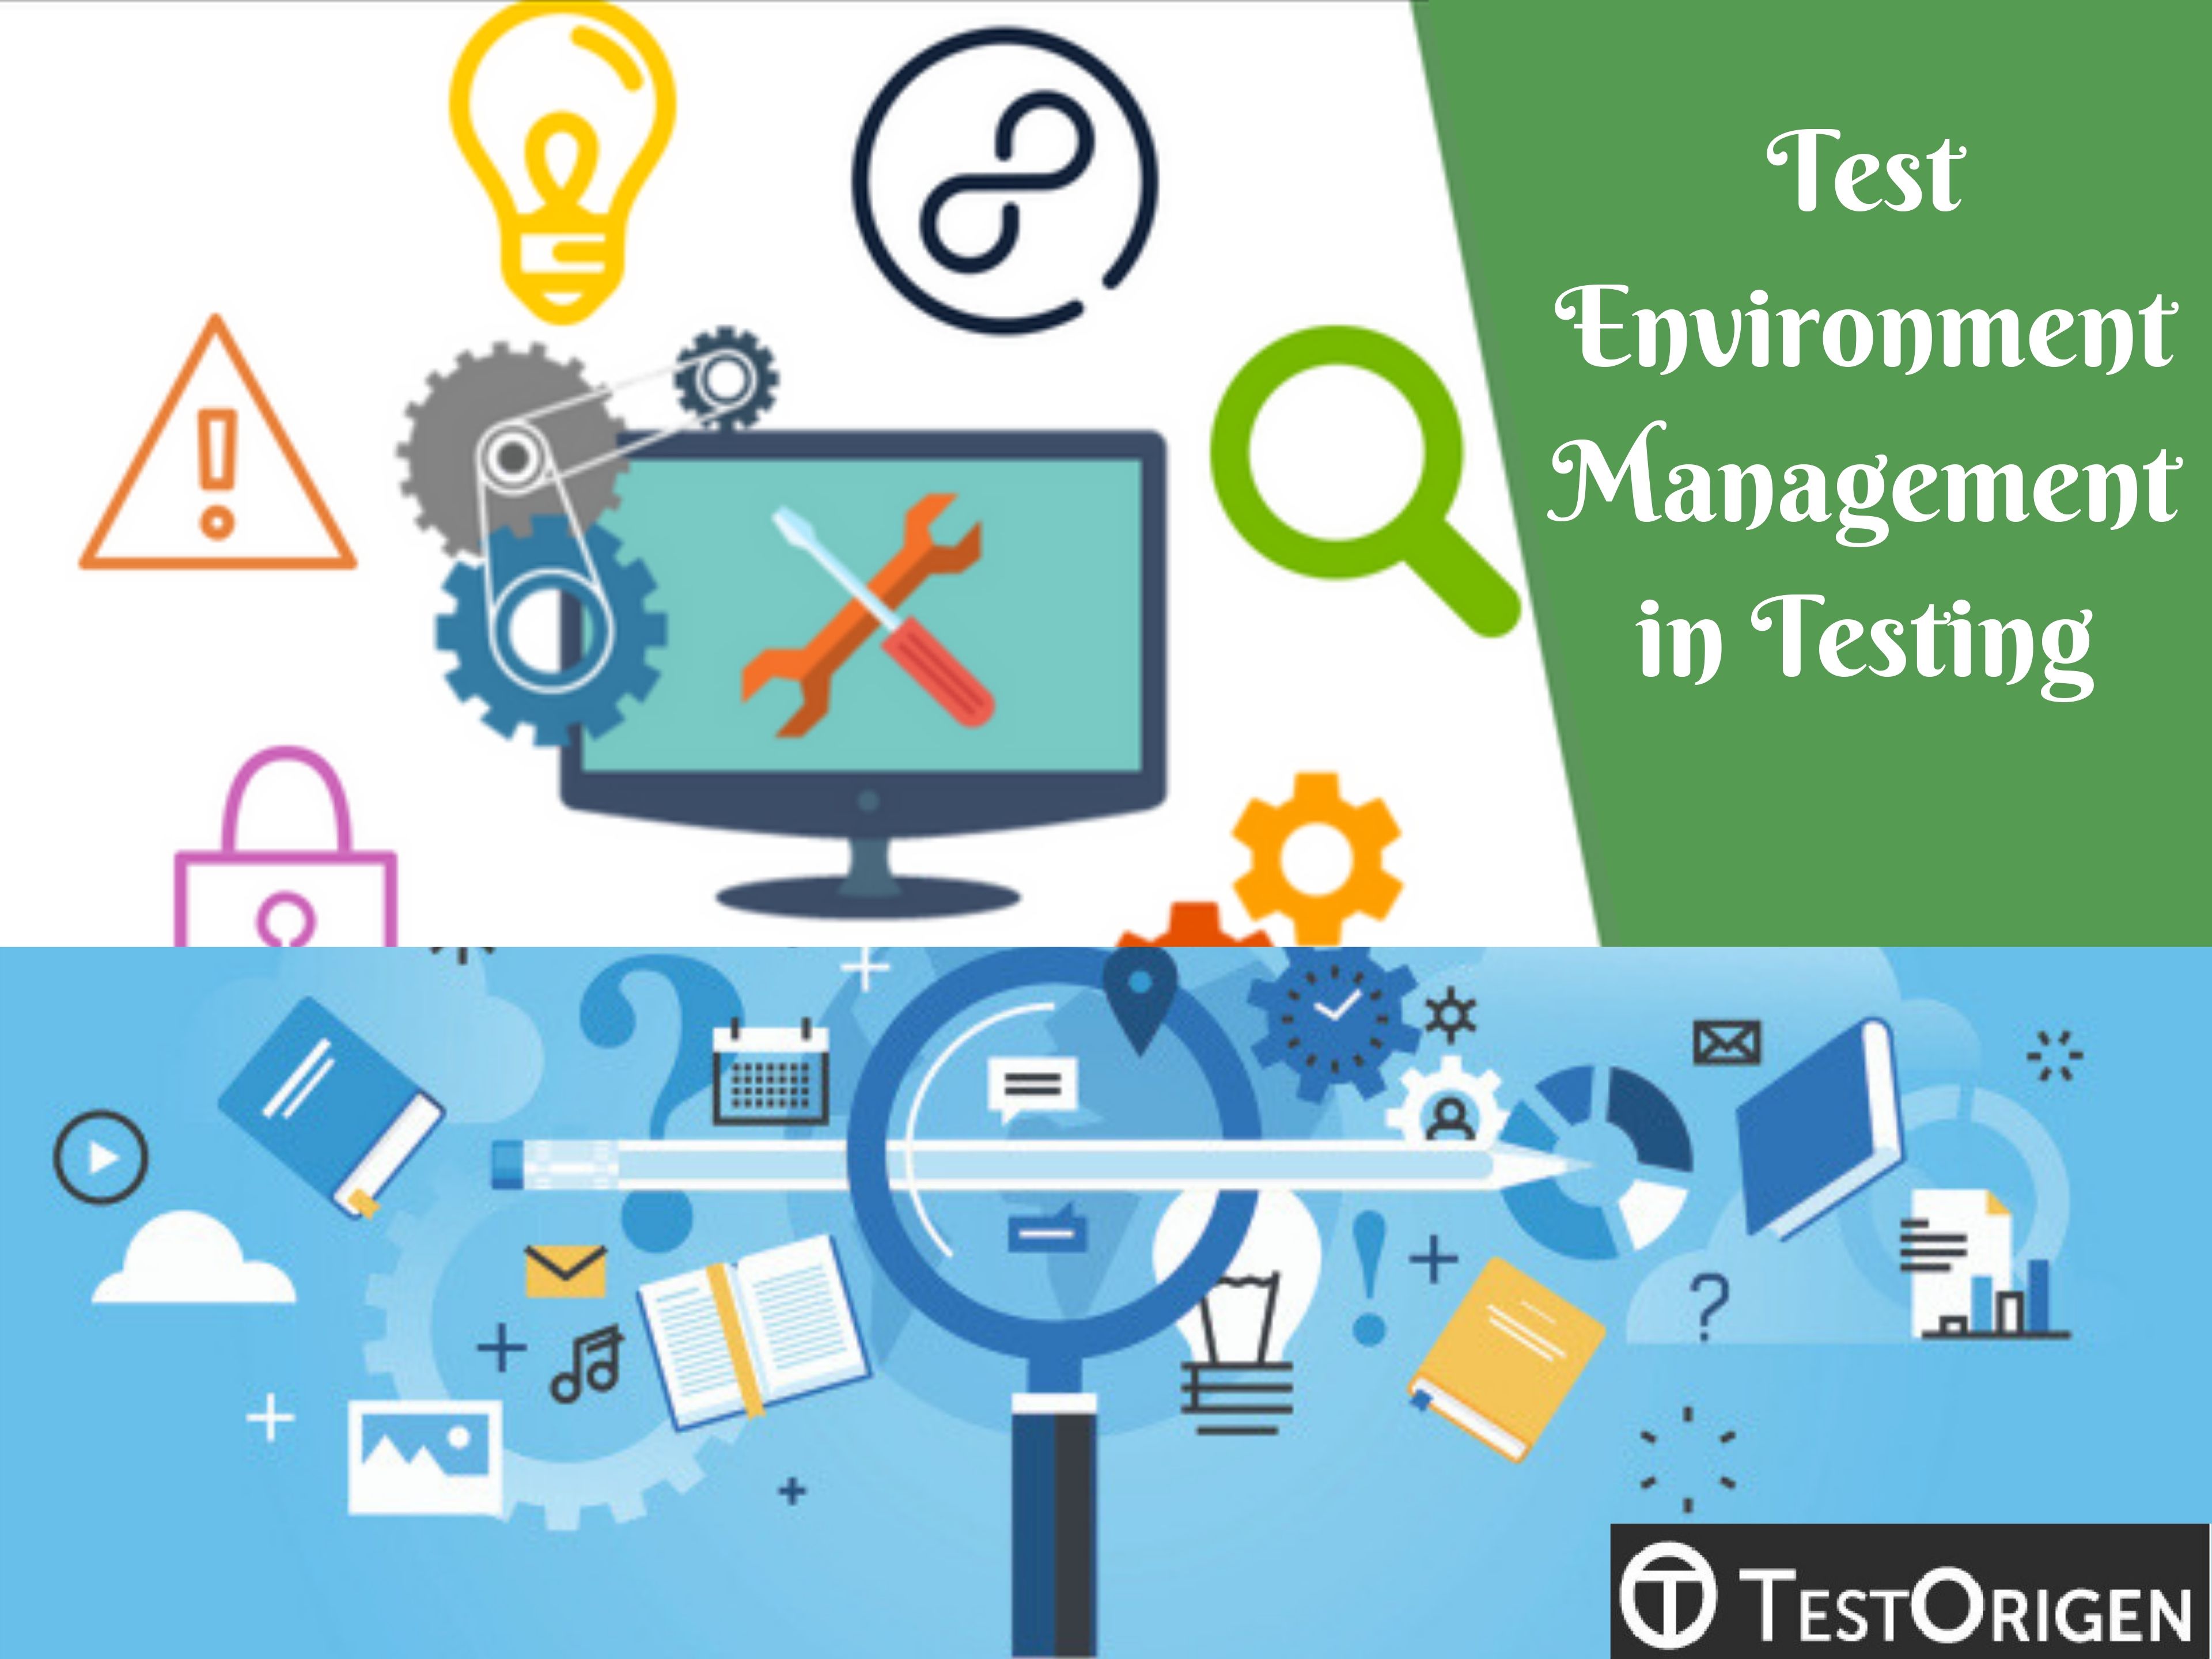 Test Environment Management in Testing